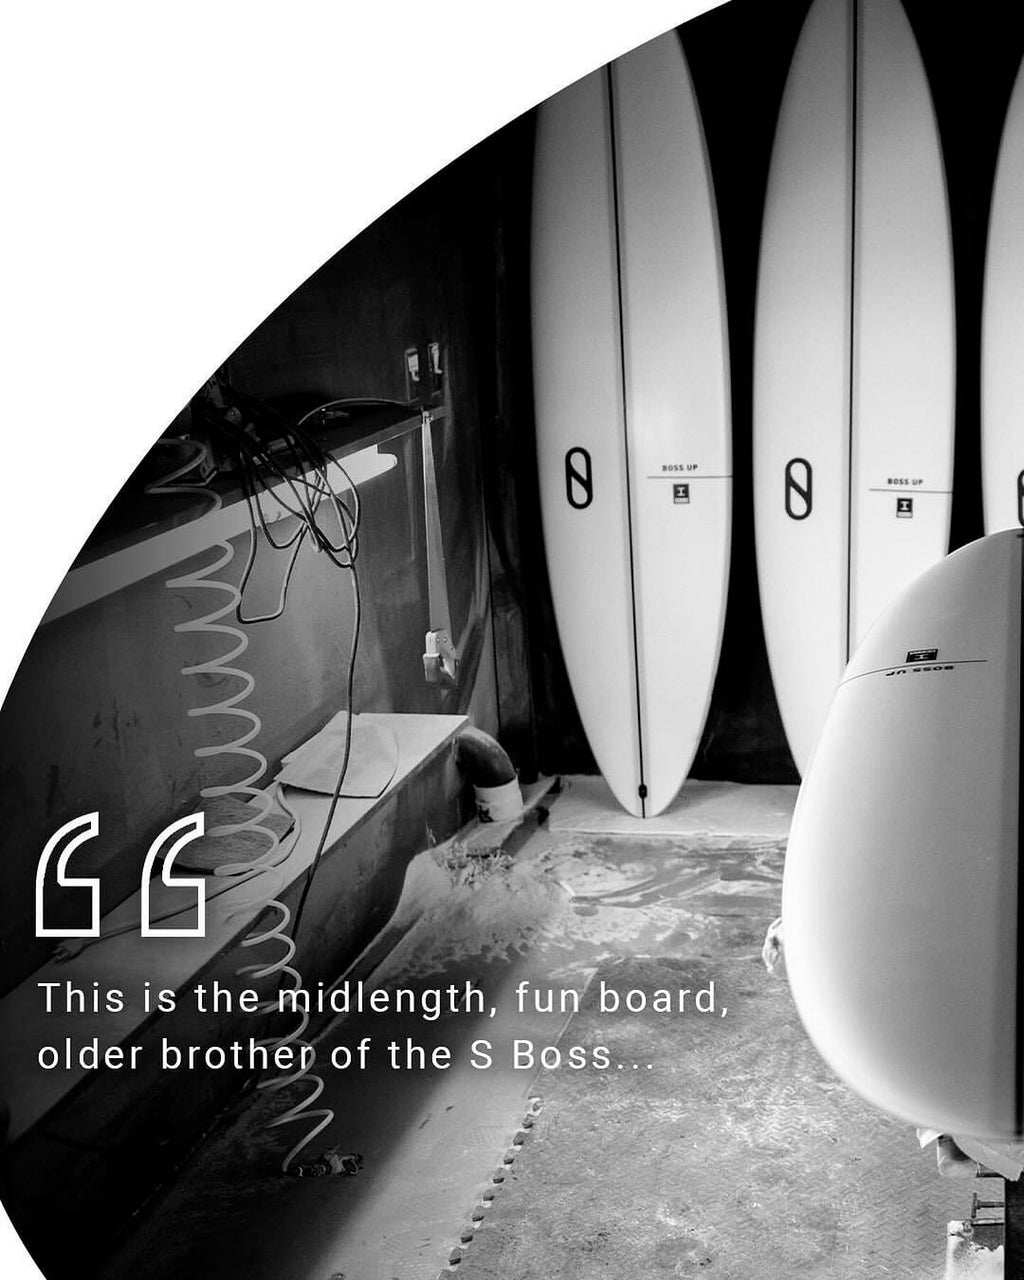 Firewire BOSS UP (6'6-7'6) Futures Ibolic